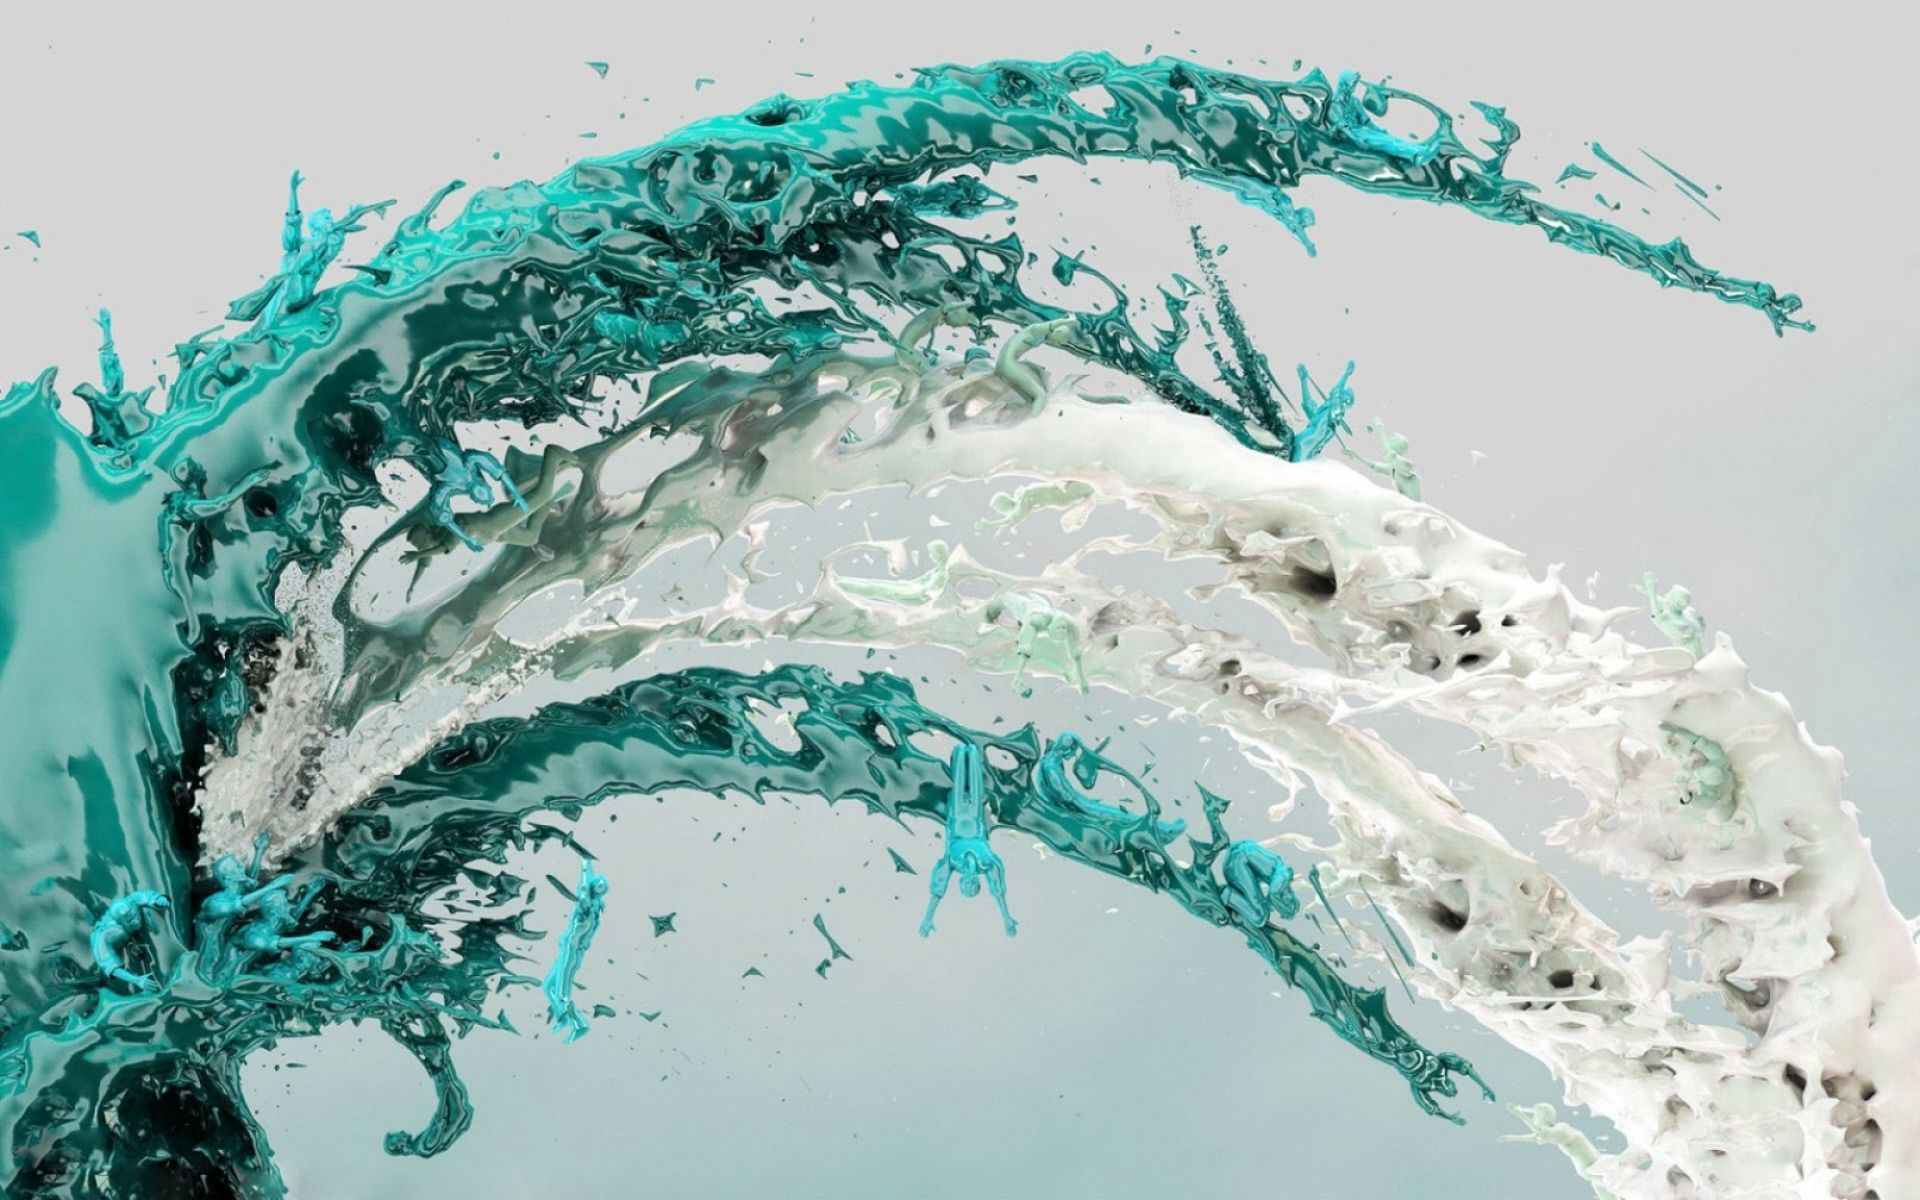 Abstract Fluid Wallpapers